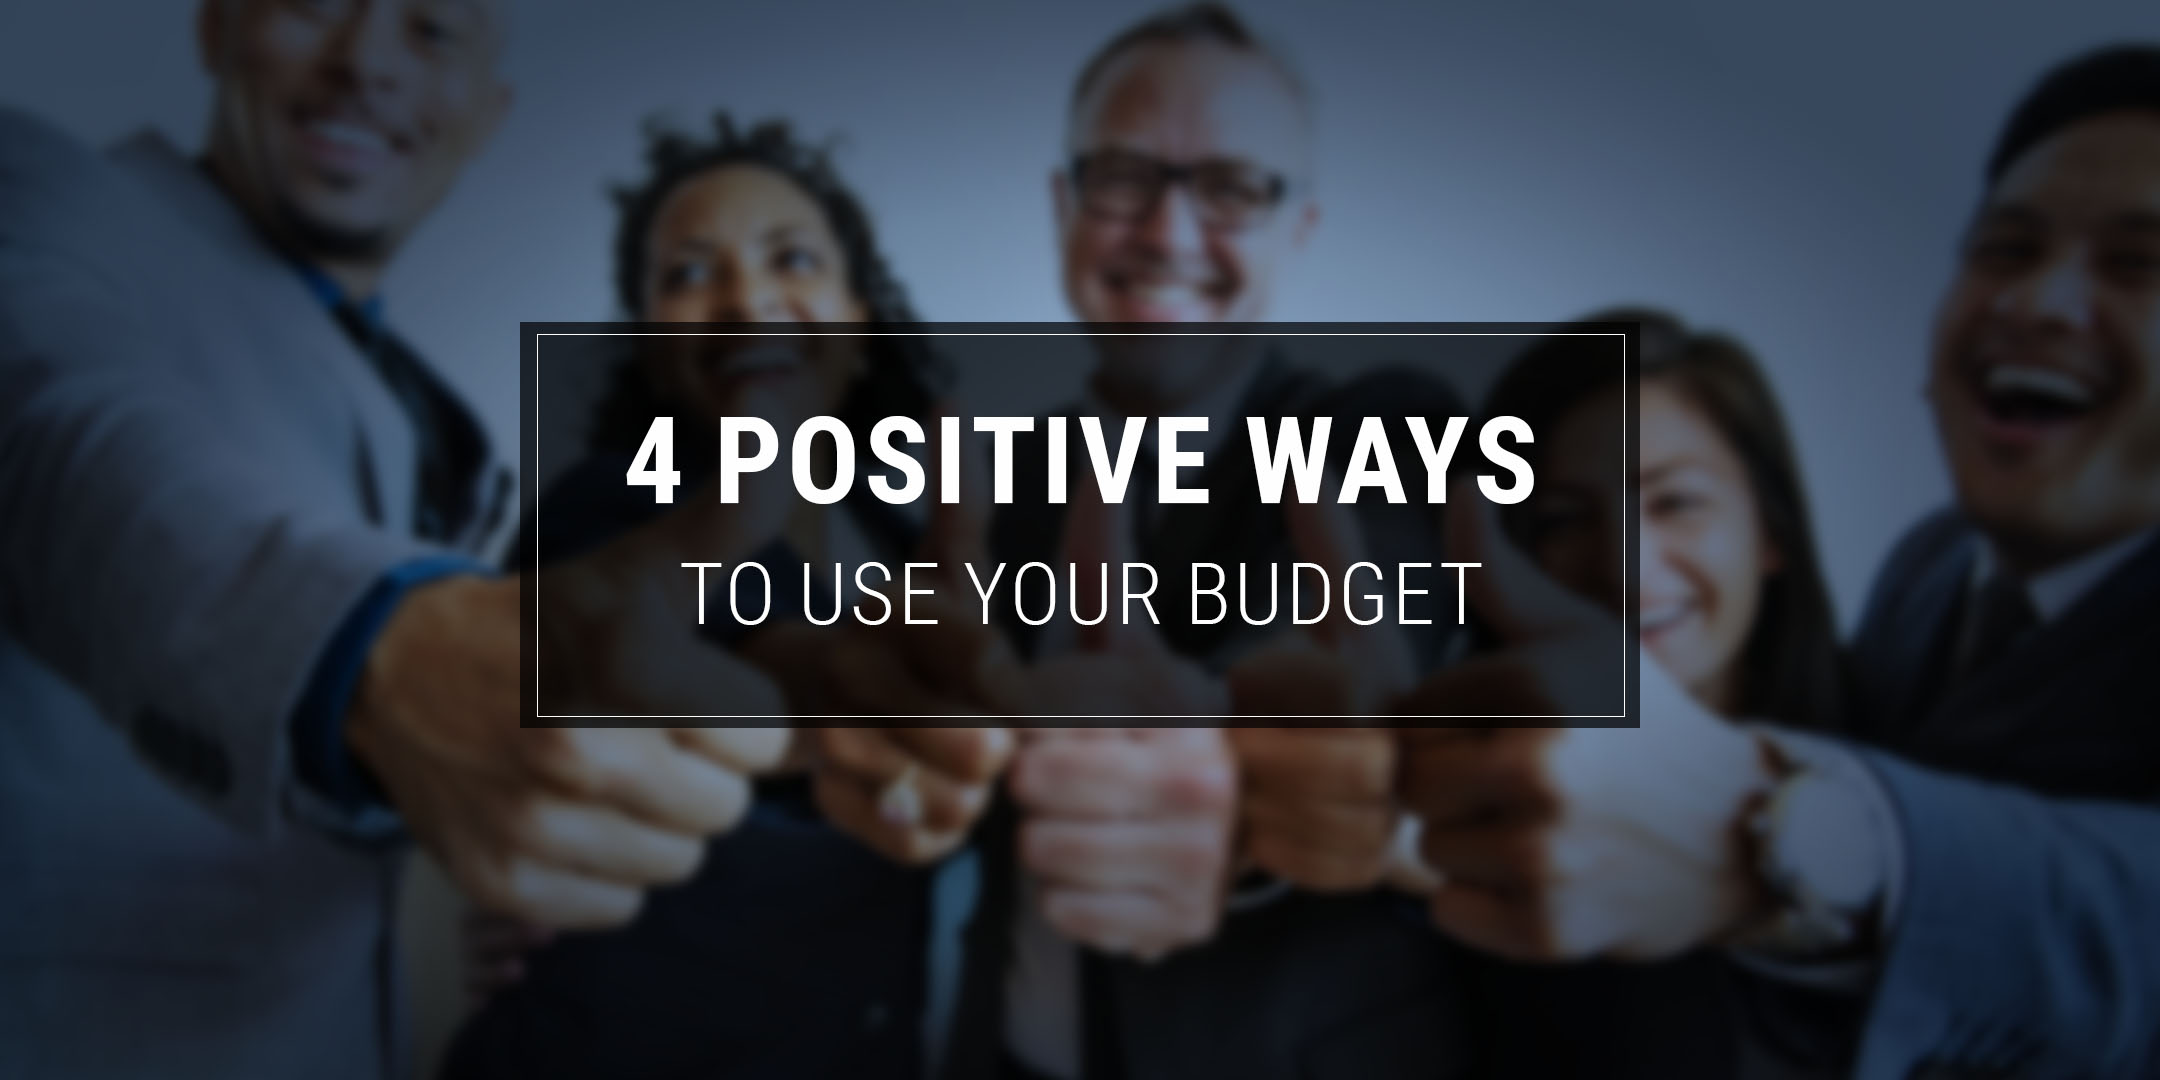 4 Positive Ways to Use Your Budget